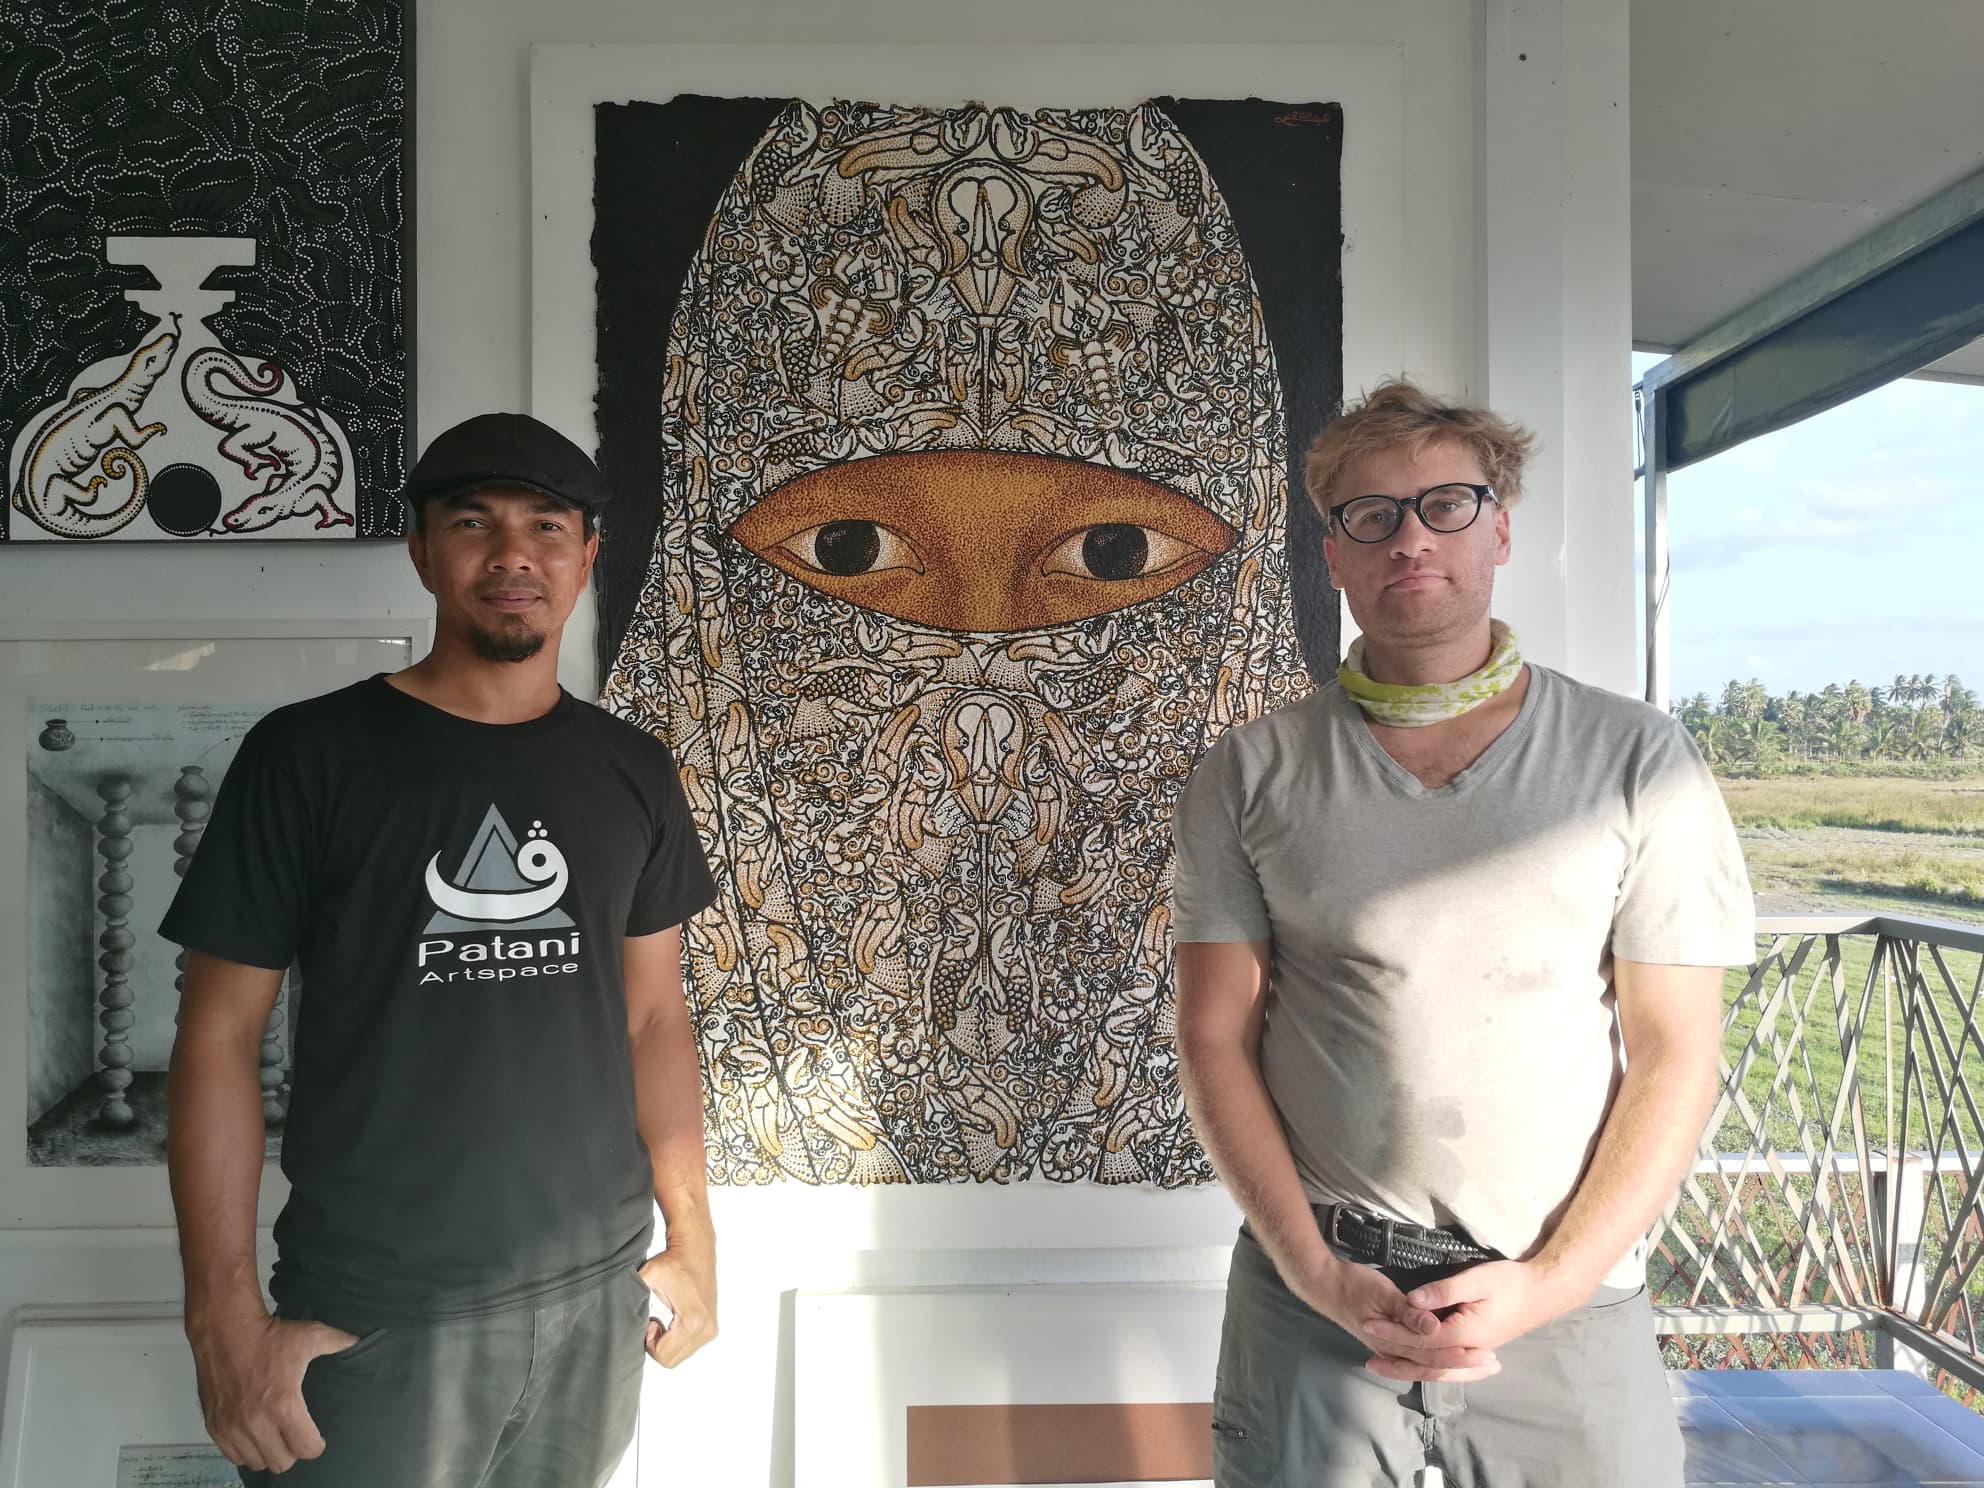 Pattani Thailand with Asia Art Tours- Experiencing Islam, Art and Community (Part 1)